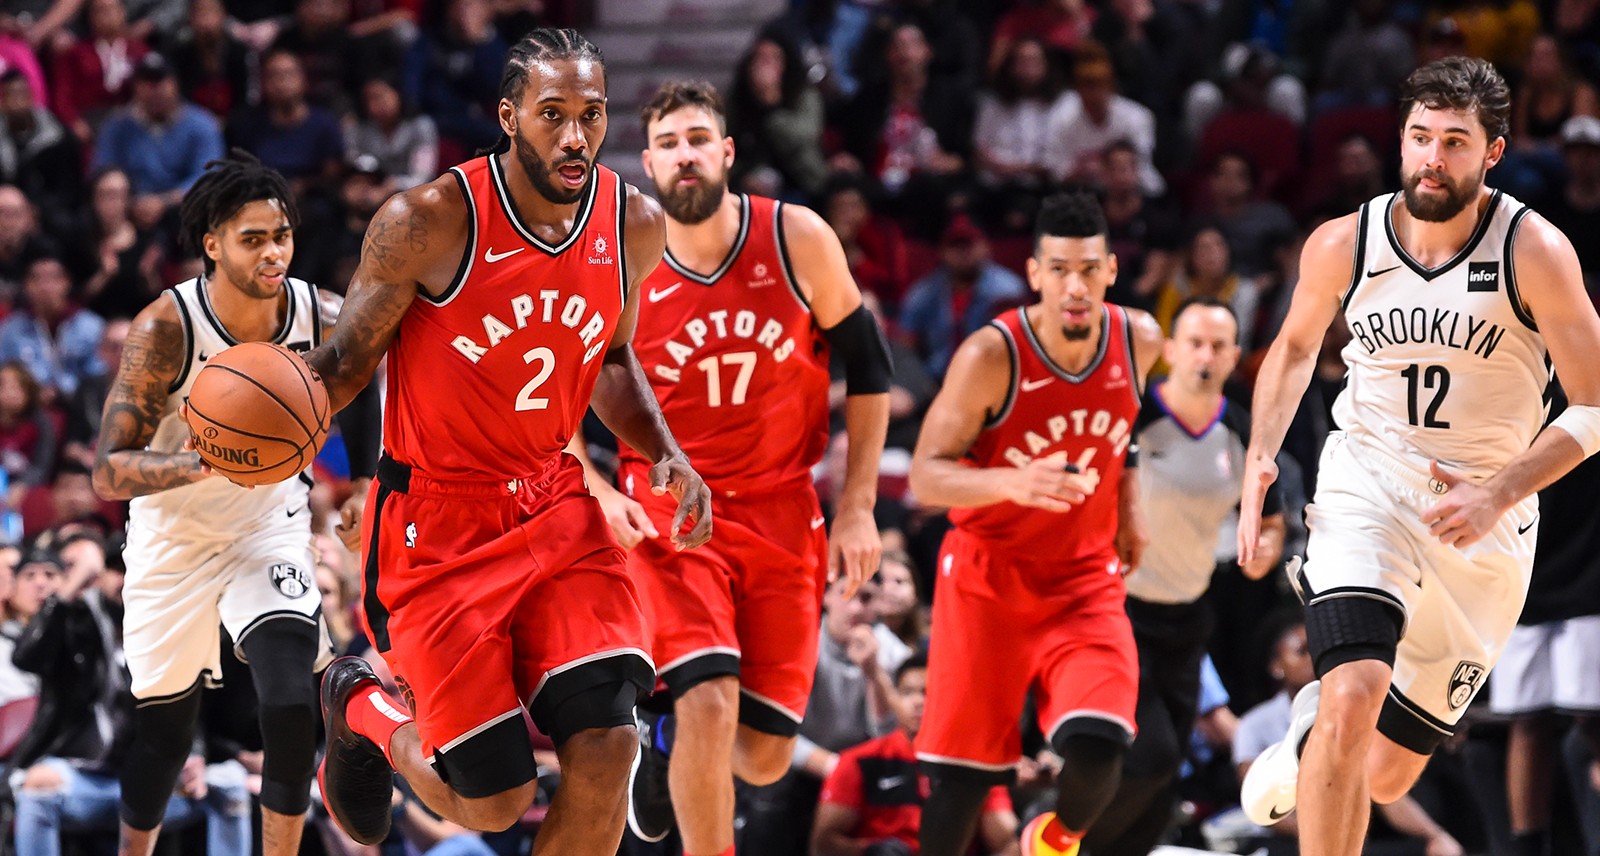 We Asked a FOX Sports Host Why American Networks Keep Ignoring the Toronto Raptors